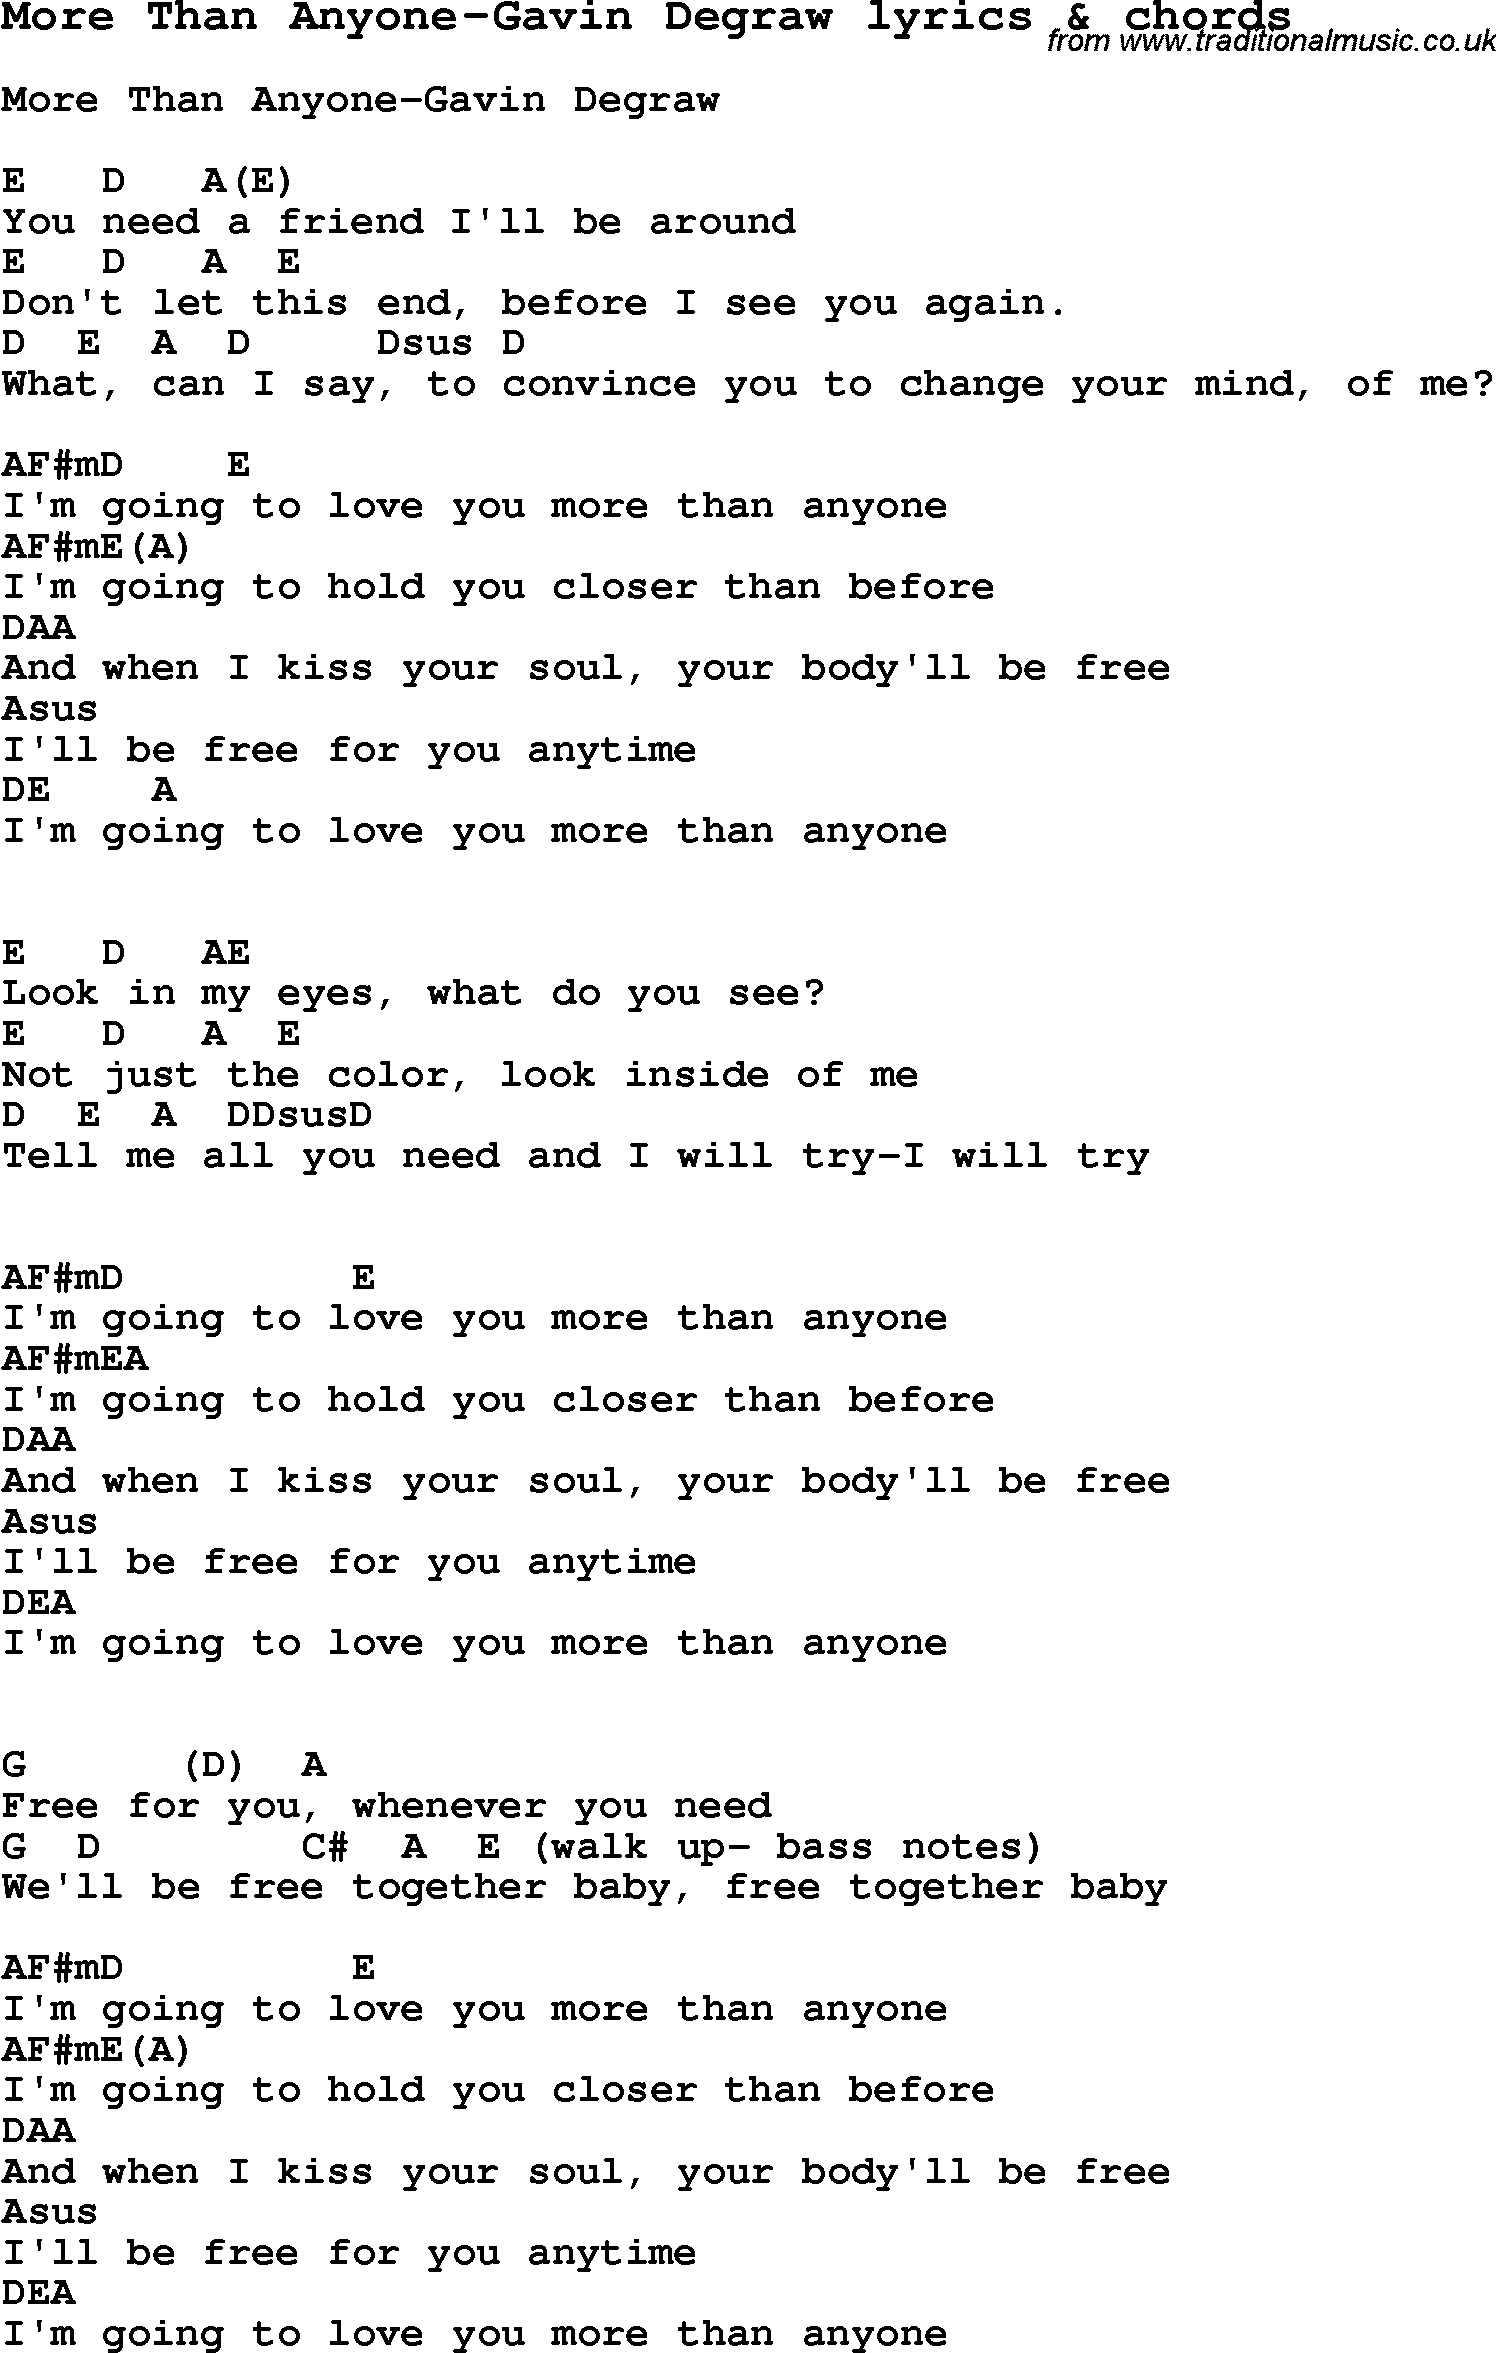 More Than Words Chords Love Song Lyrics Formore Than Anyone Gavin Degraw With Chords